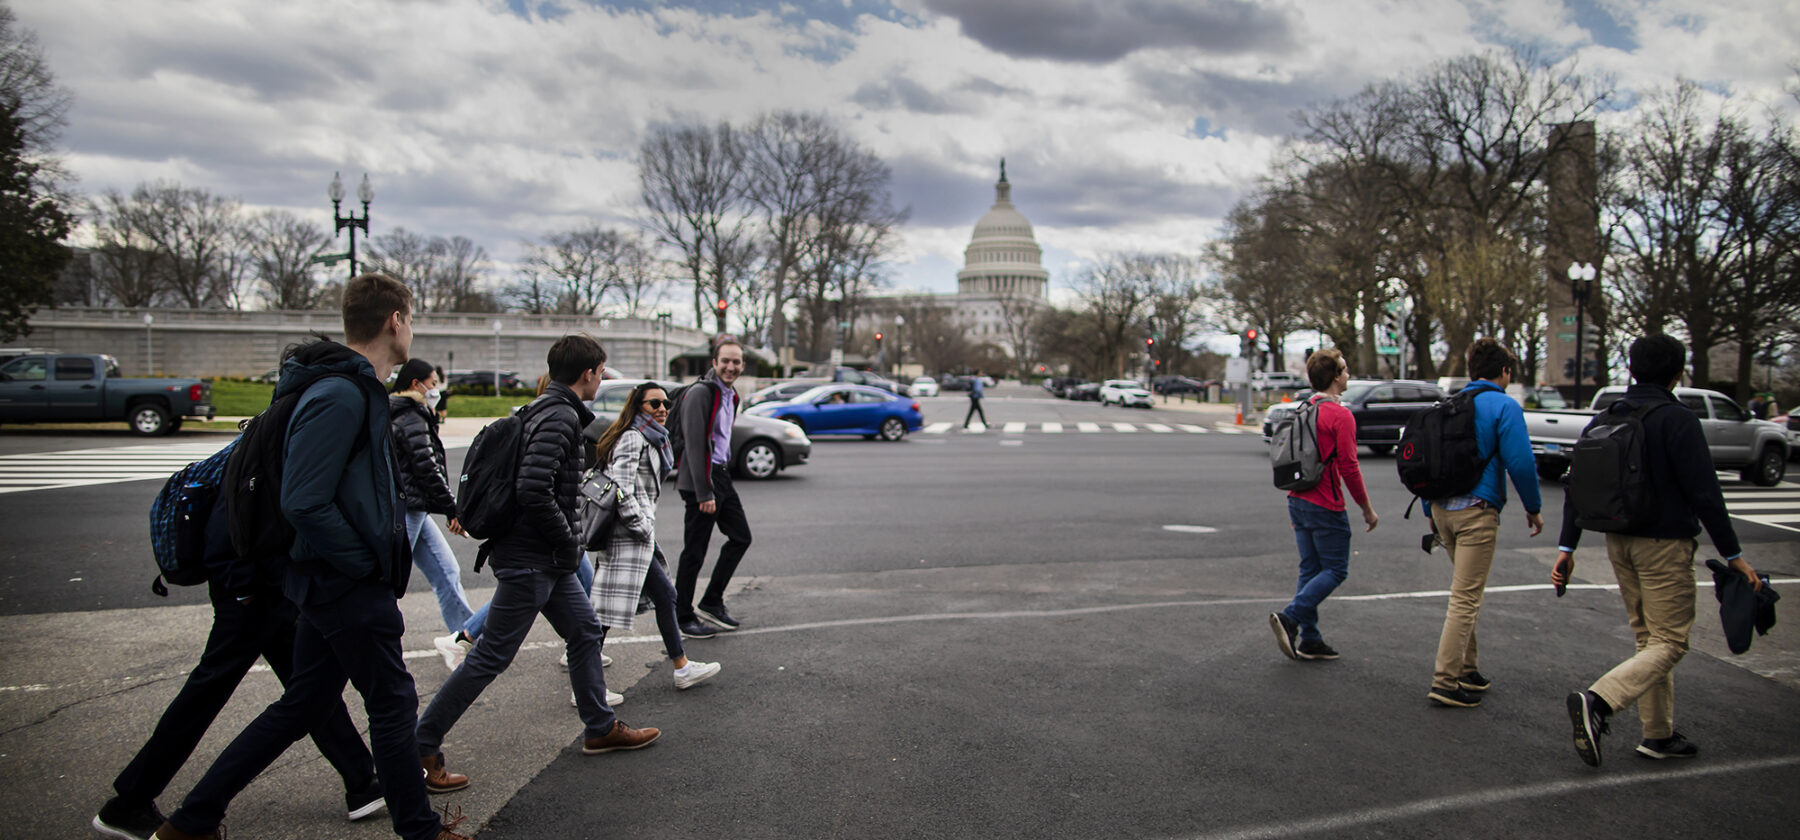 Last spring, Penn students took Amtrak to Washington every Friday for the How Washington Really Works class, held at the Penn Biden Center, across from the U.S. Capitol.